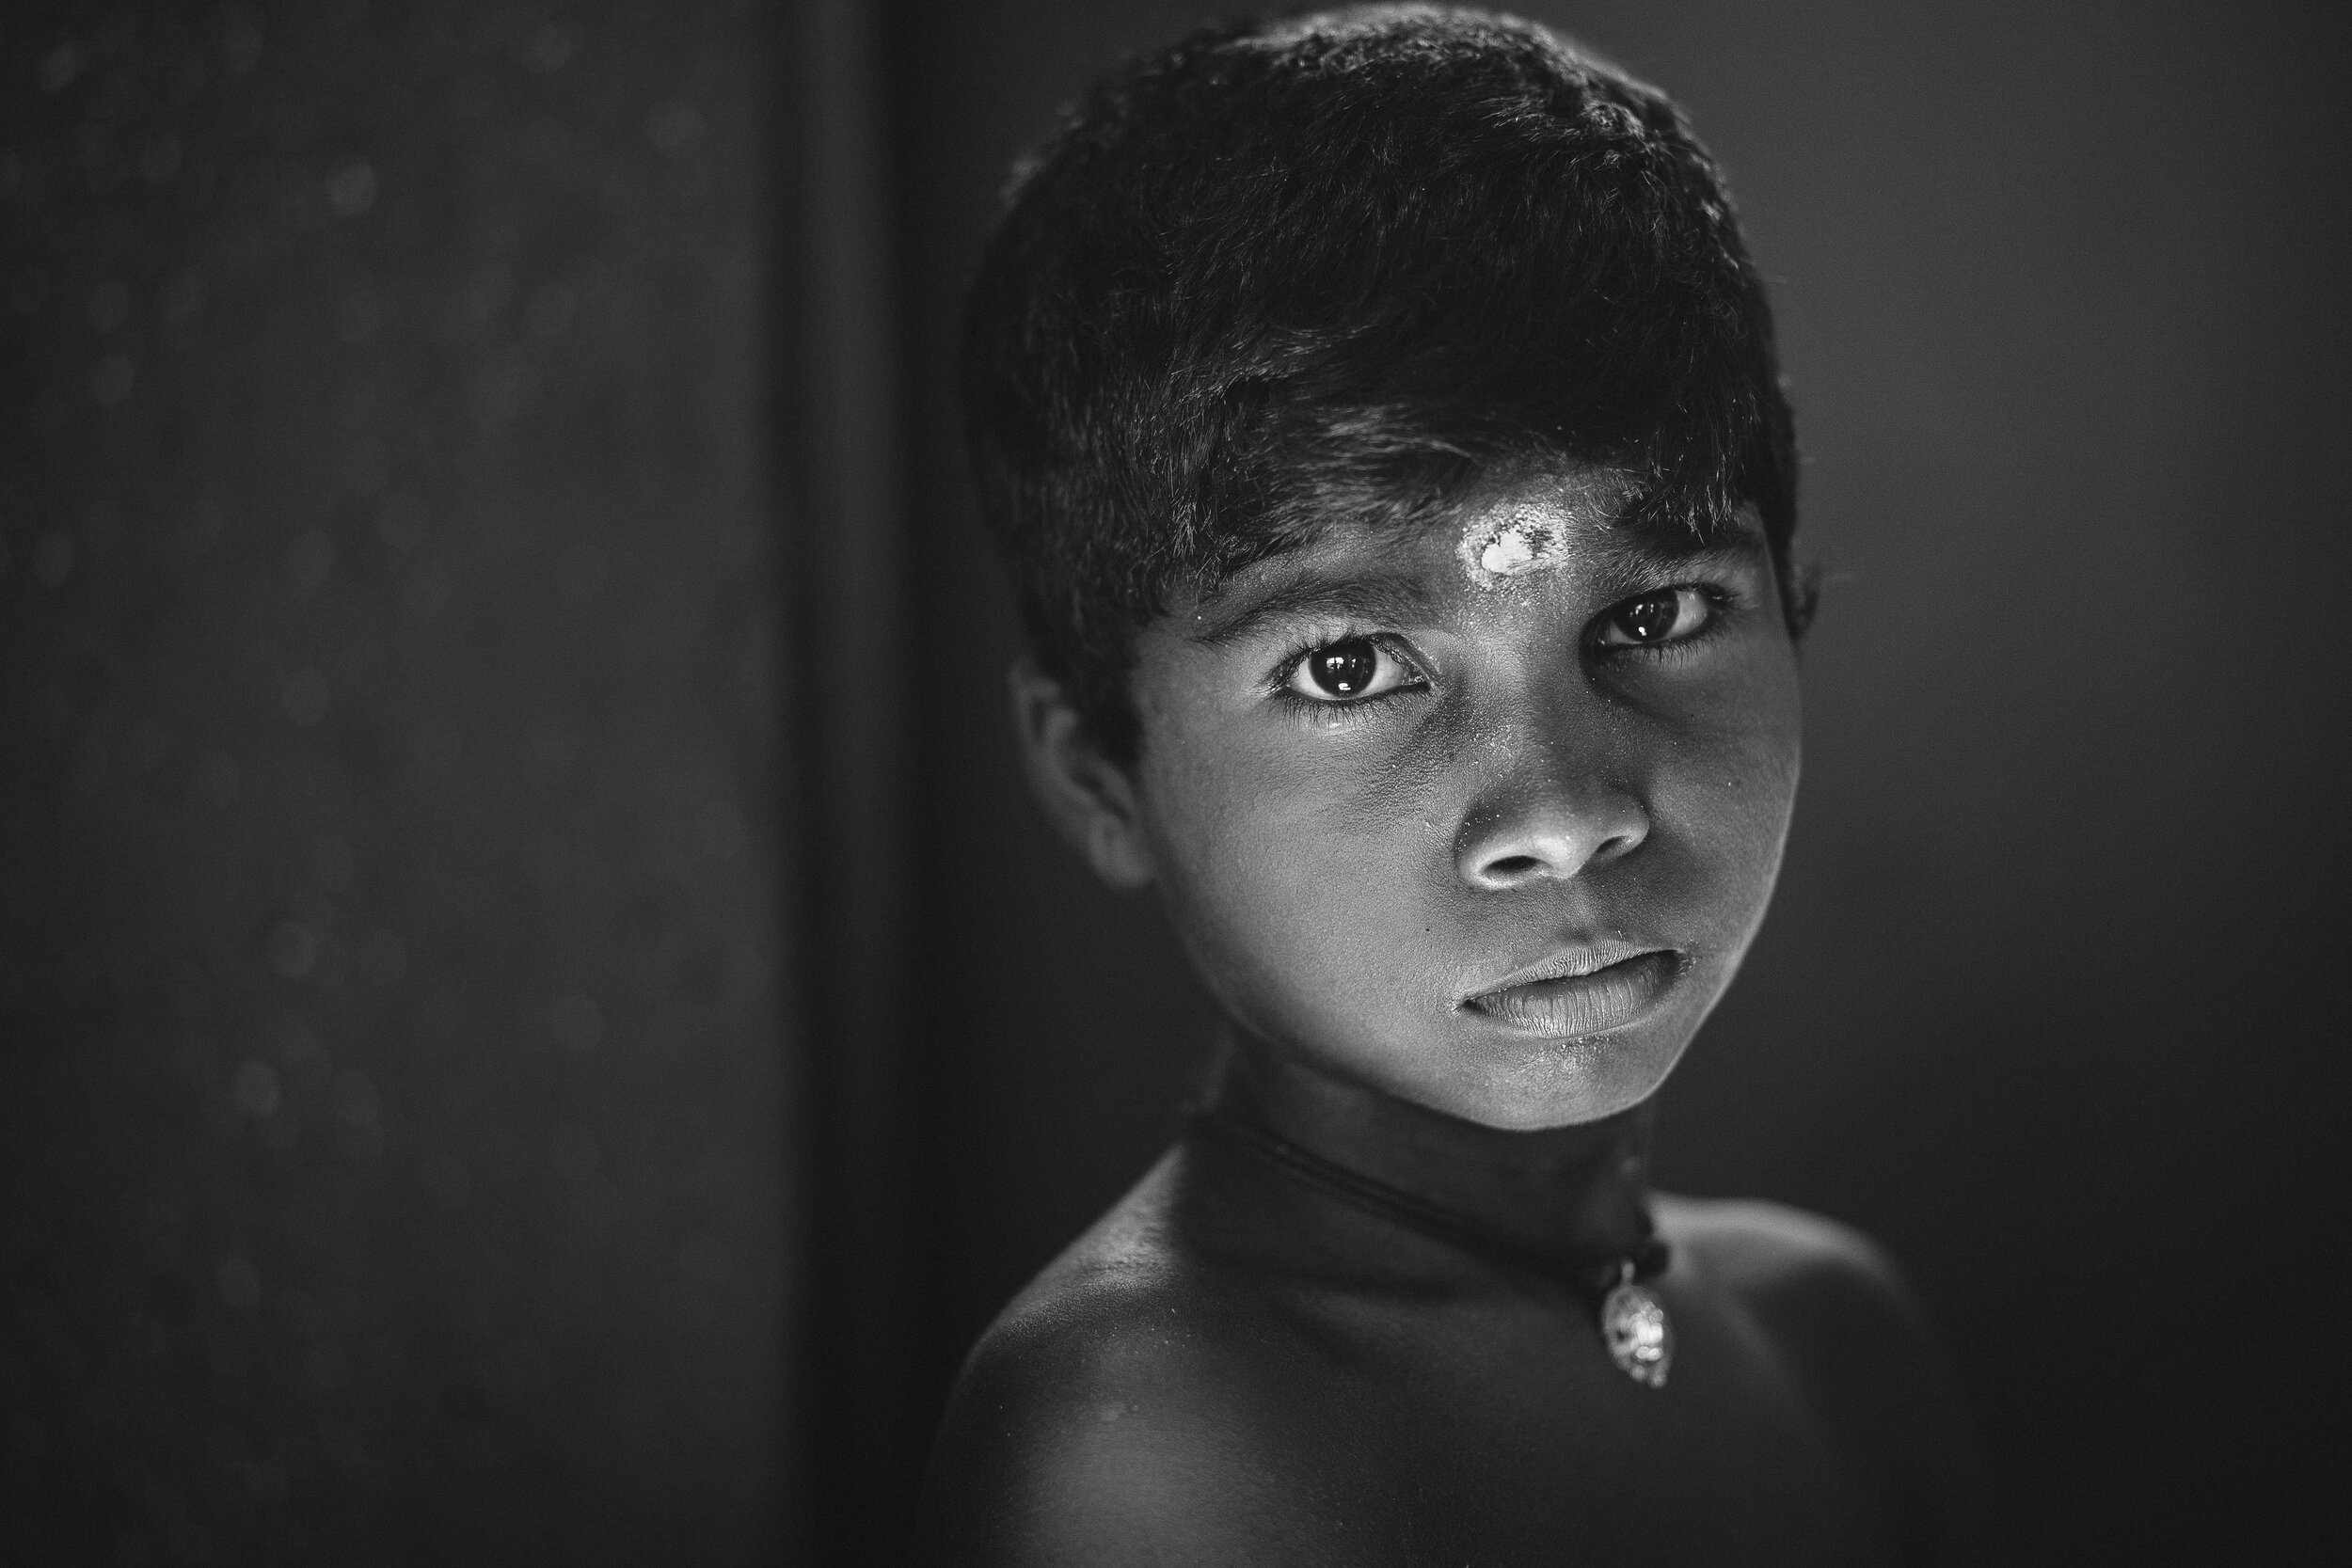 Black and white portrait of a young boy in Jaffna - Sri Lanka